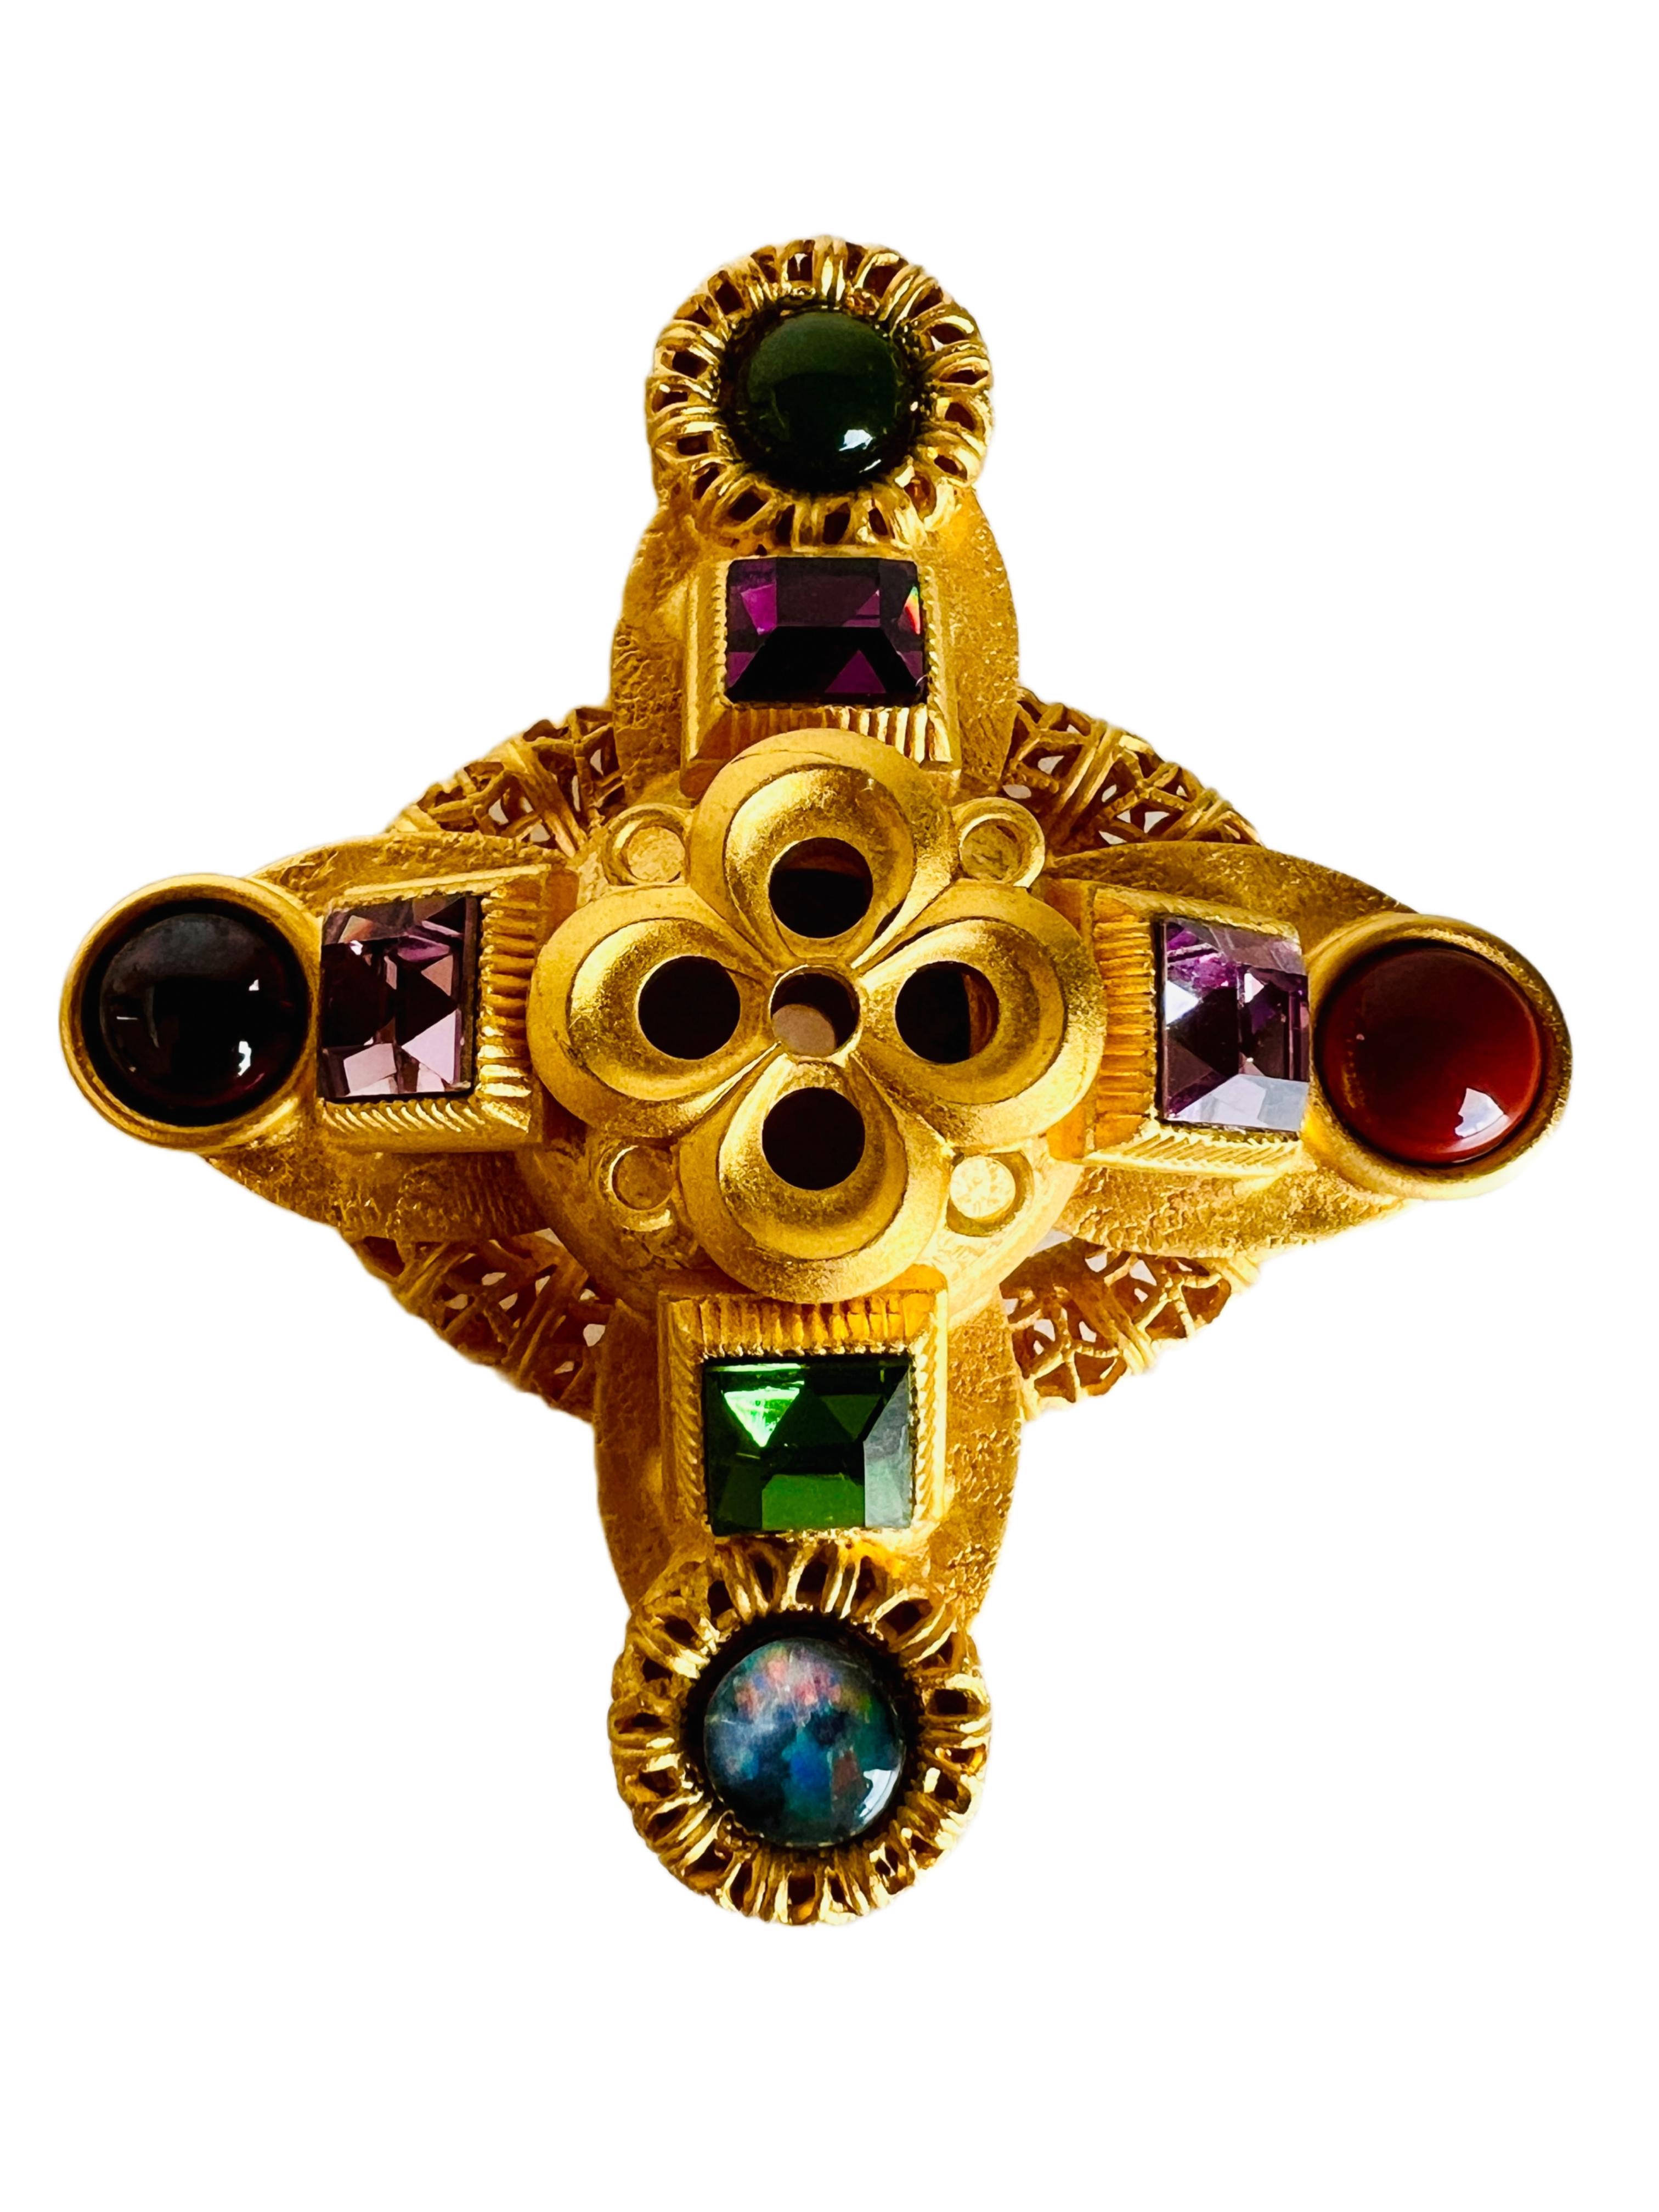 This exquisite brooch pin by Natasha Stambouli showcases a haute couture Etruscan revival style cross design, adorned with semi-precious stones in vibrant multicolor hues. The piece features eight stones, including 2 varieties of Chalcedony, a